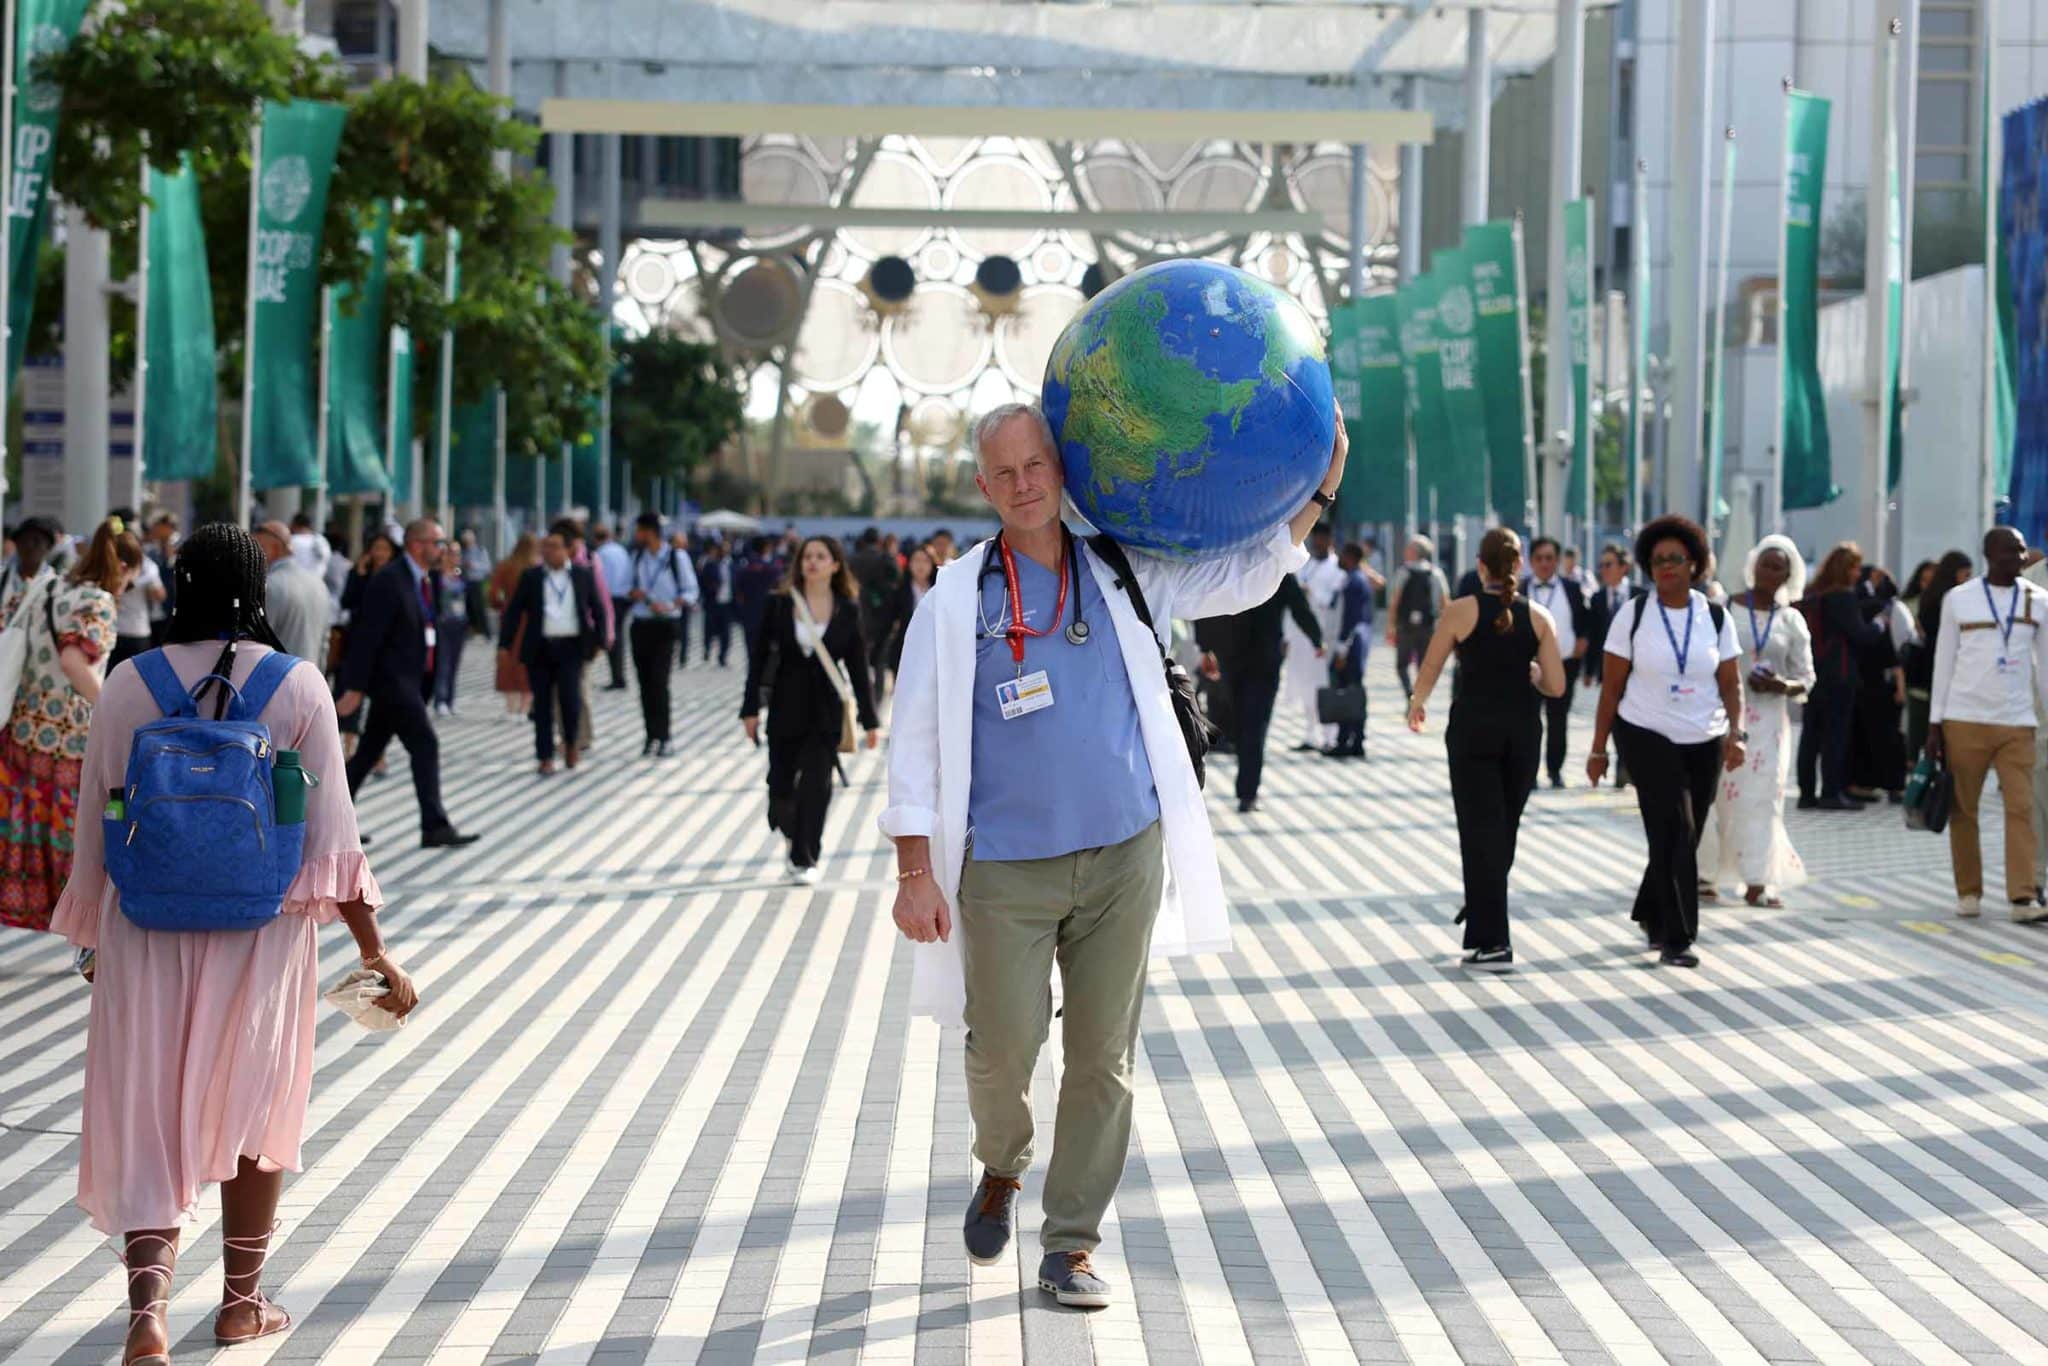 A man wearing a lab coat and stethoscope walks down a hallway carrying an inflated globe